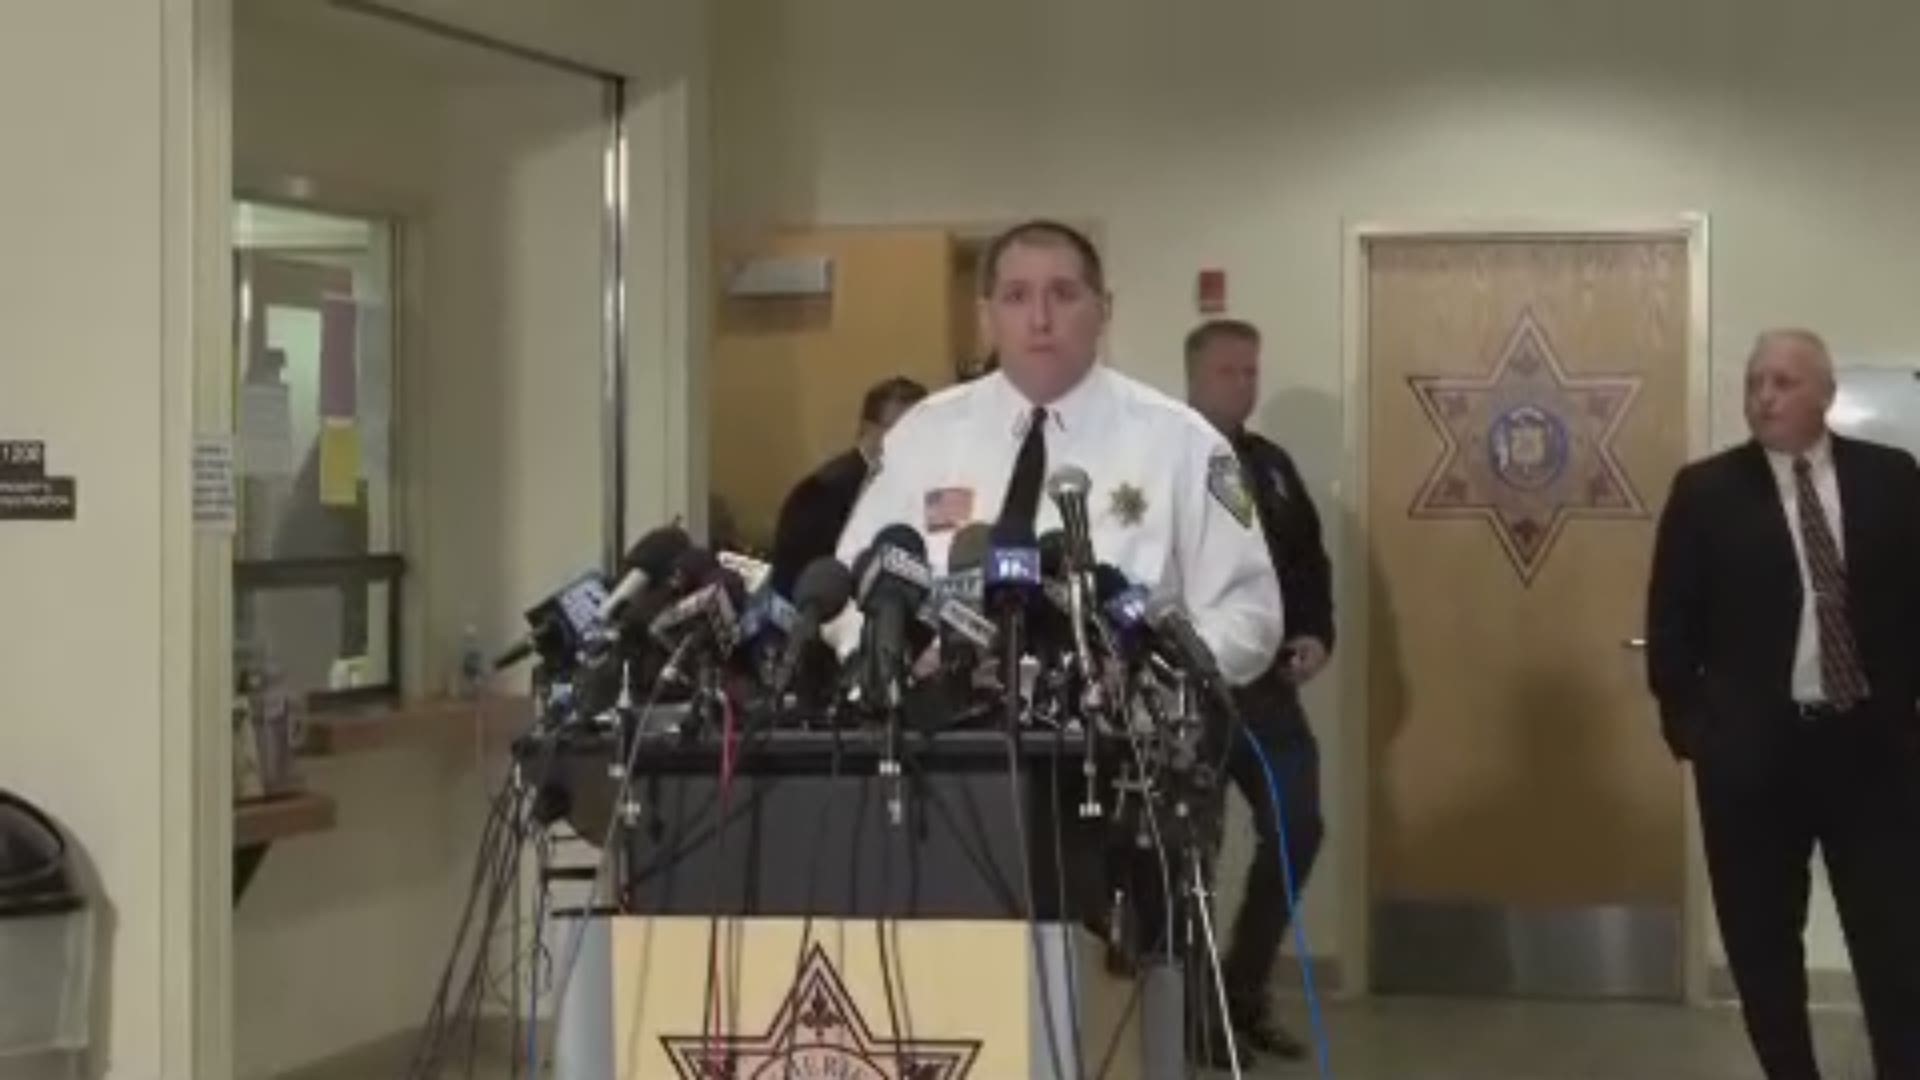 The full press conference announcing the arrest of Jake Patterson in the Jayme Closs missing persons case.